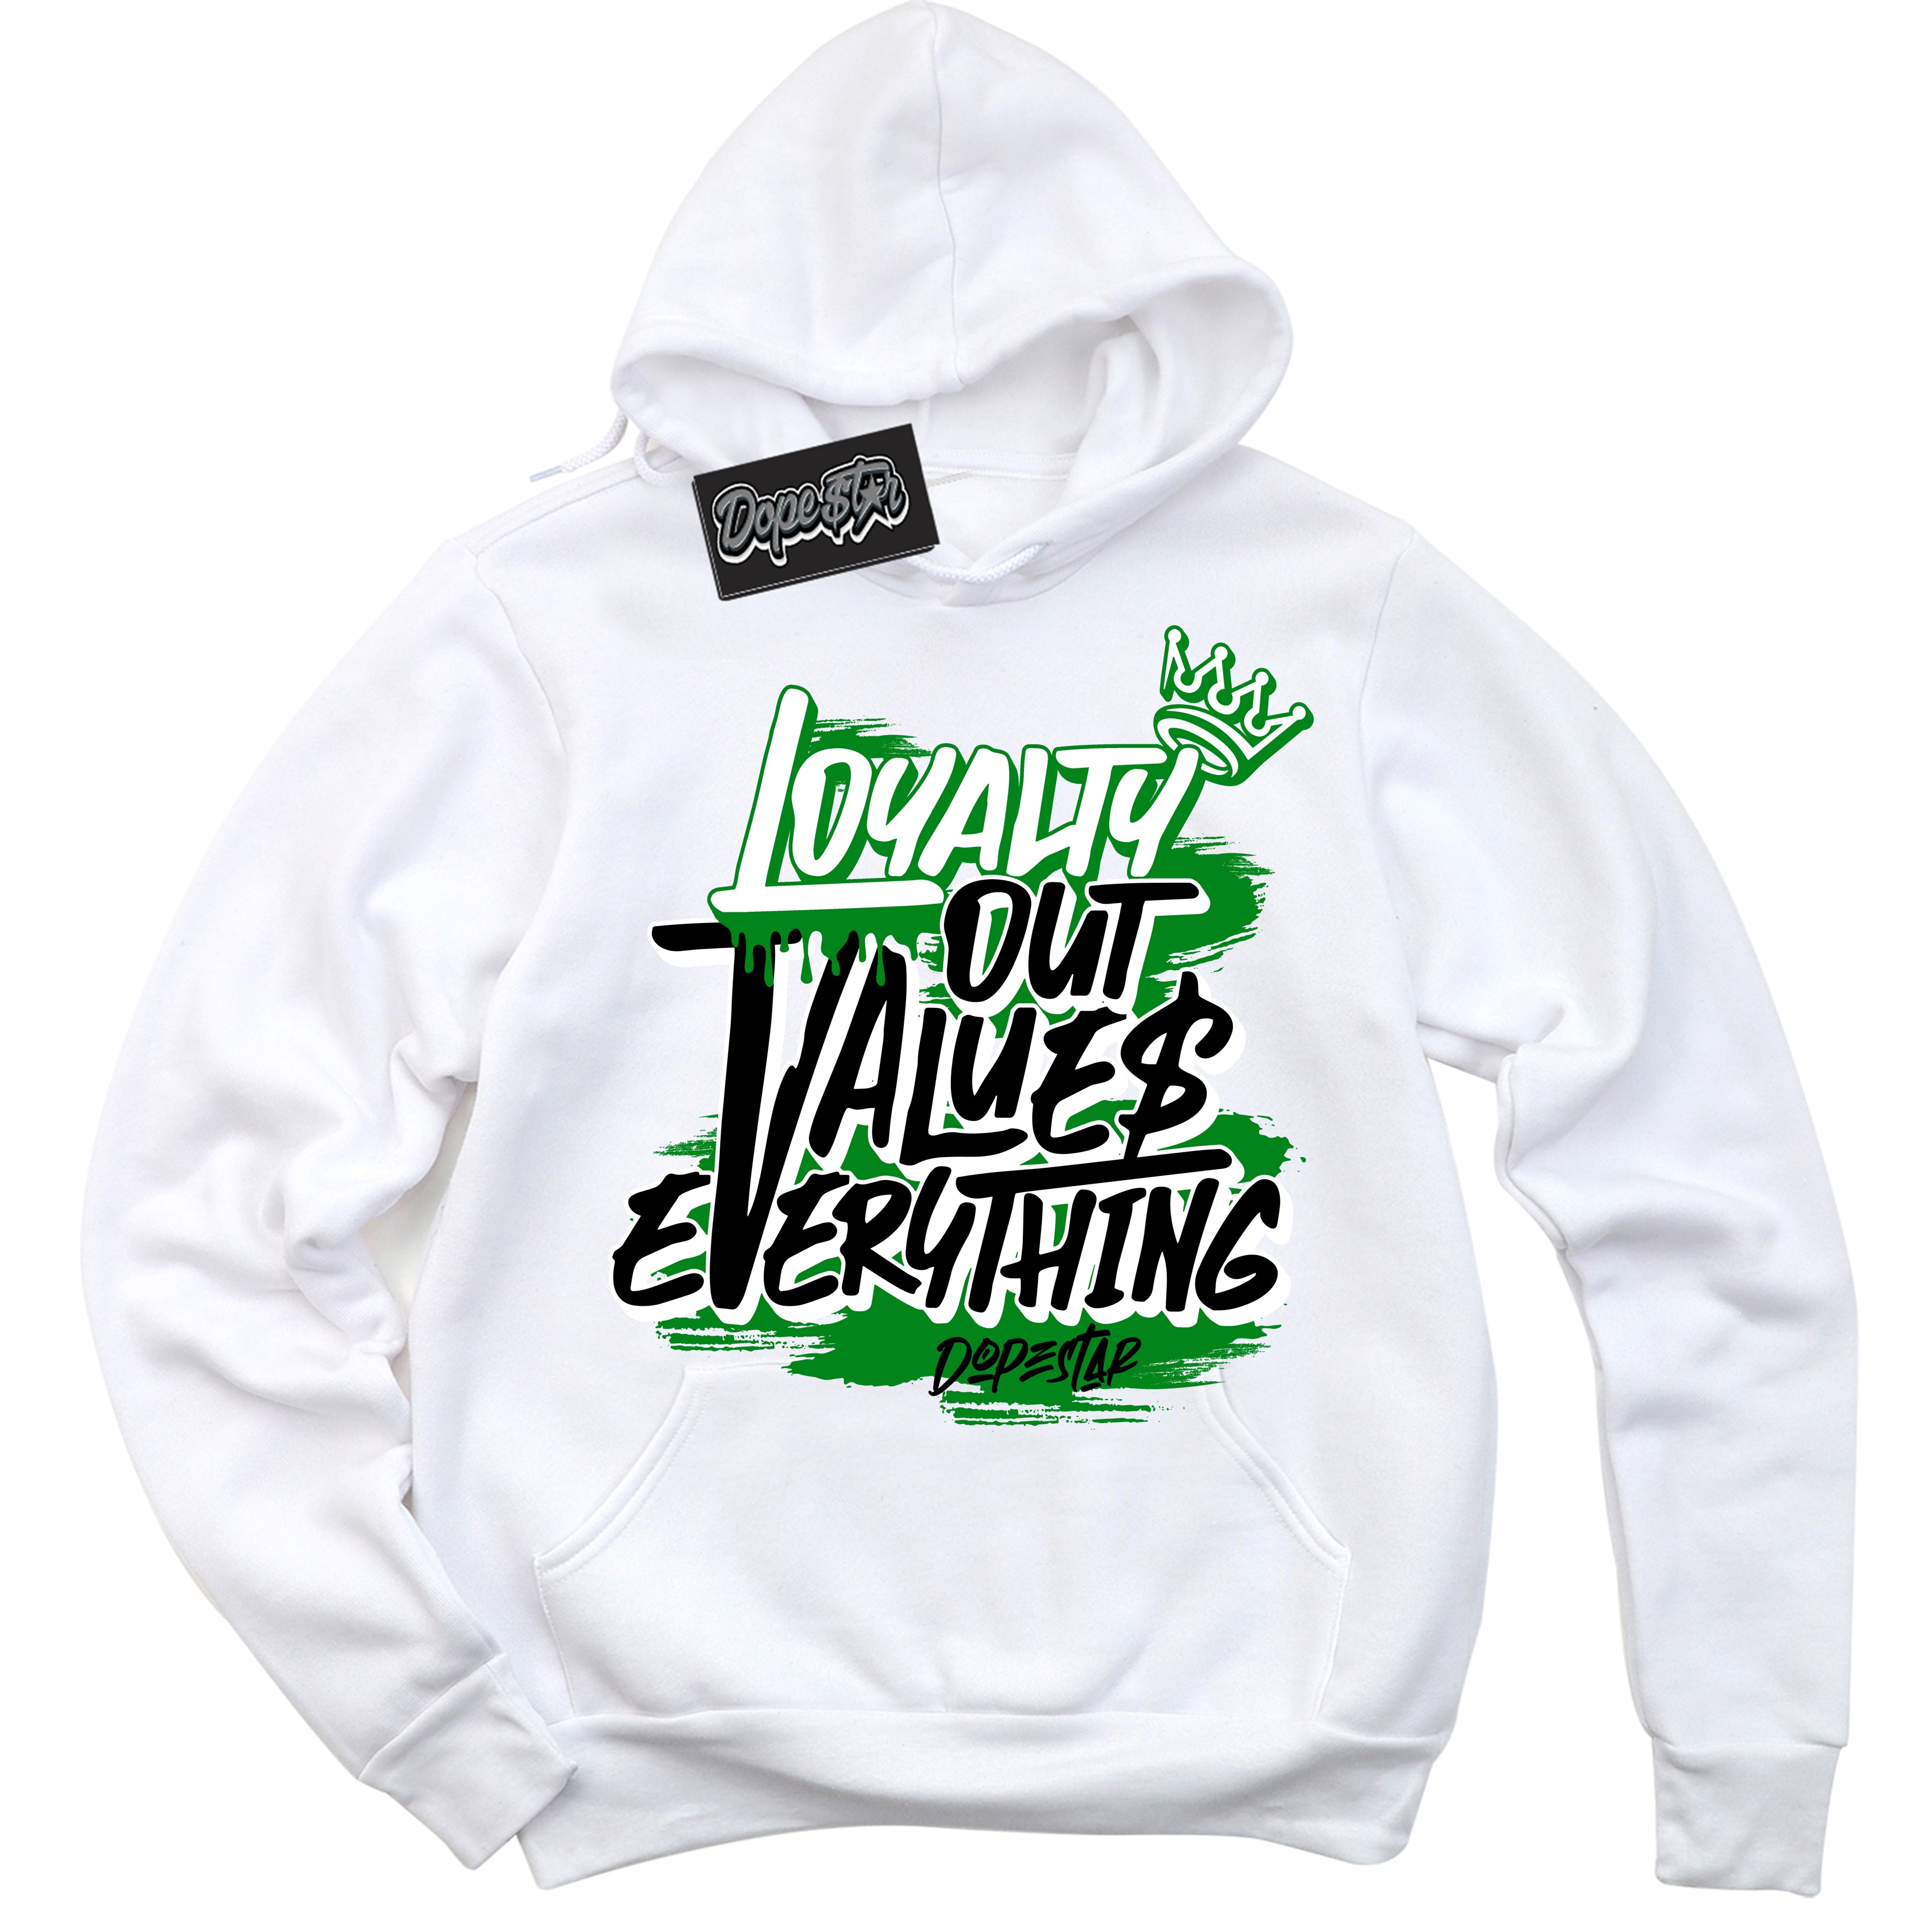 Cool White Hoodie with “ Loyalty Out Values Everything ”  design that Perfectly Matches Lucky Green 1s Sneakers.